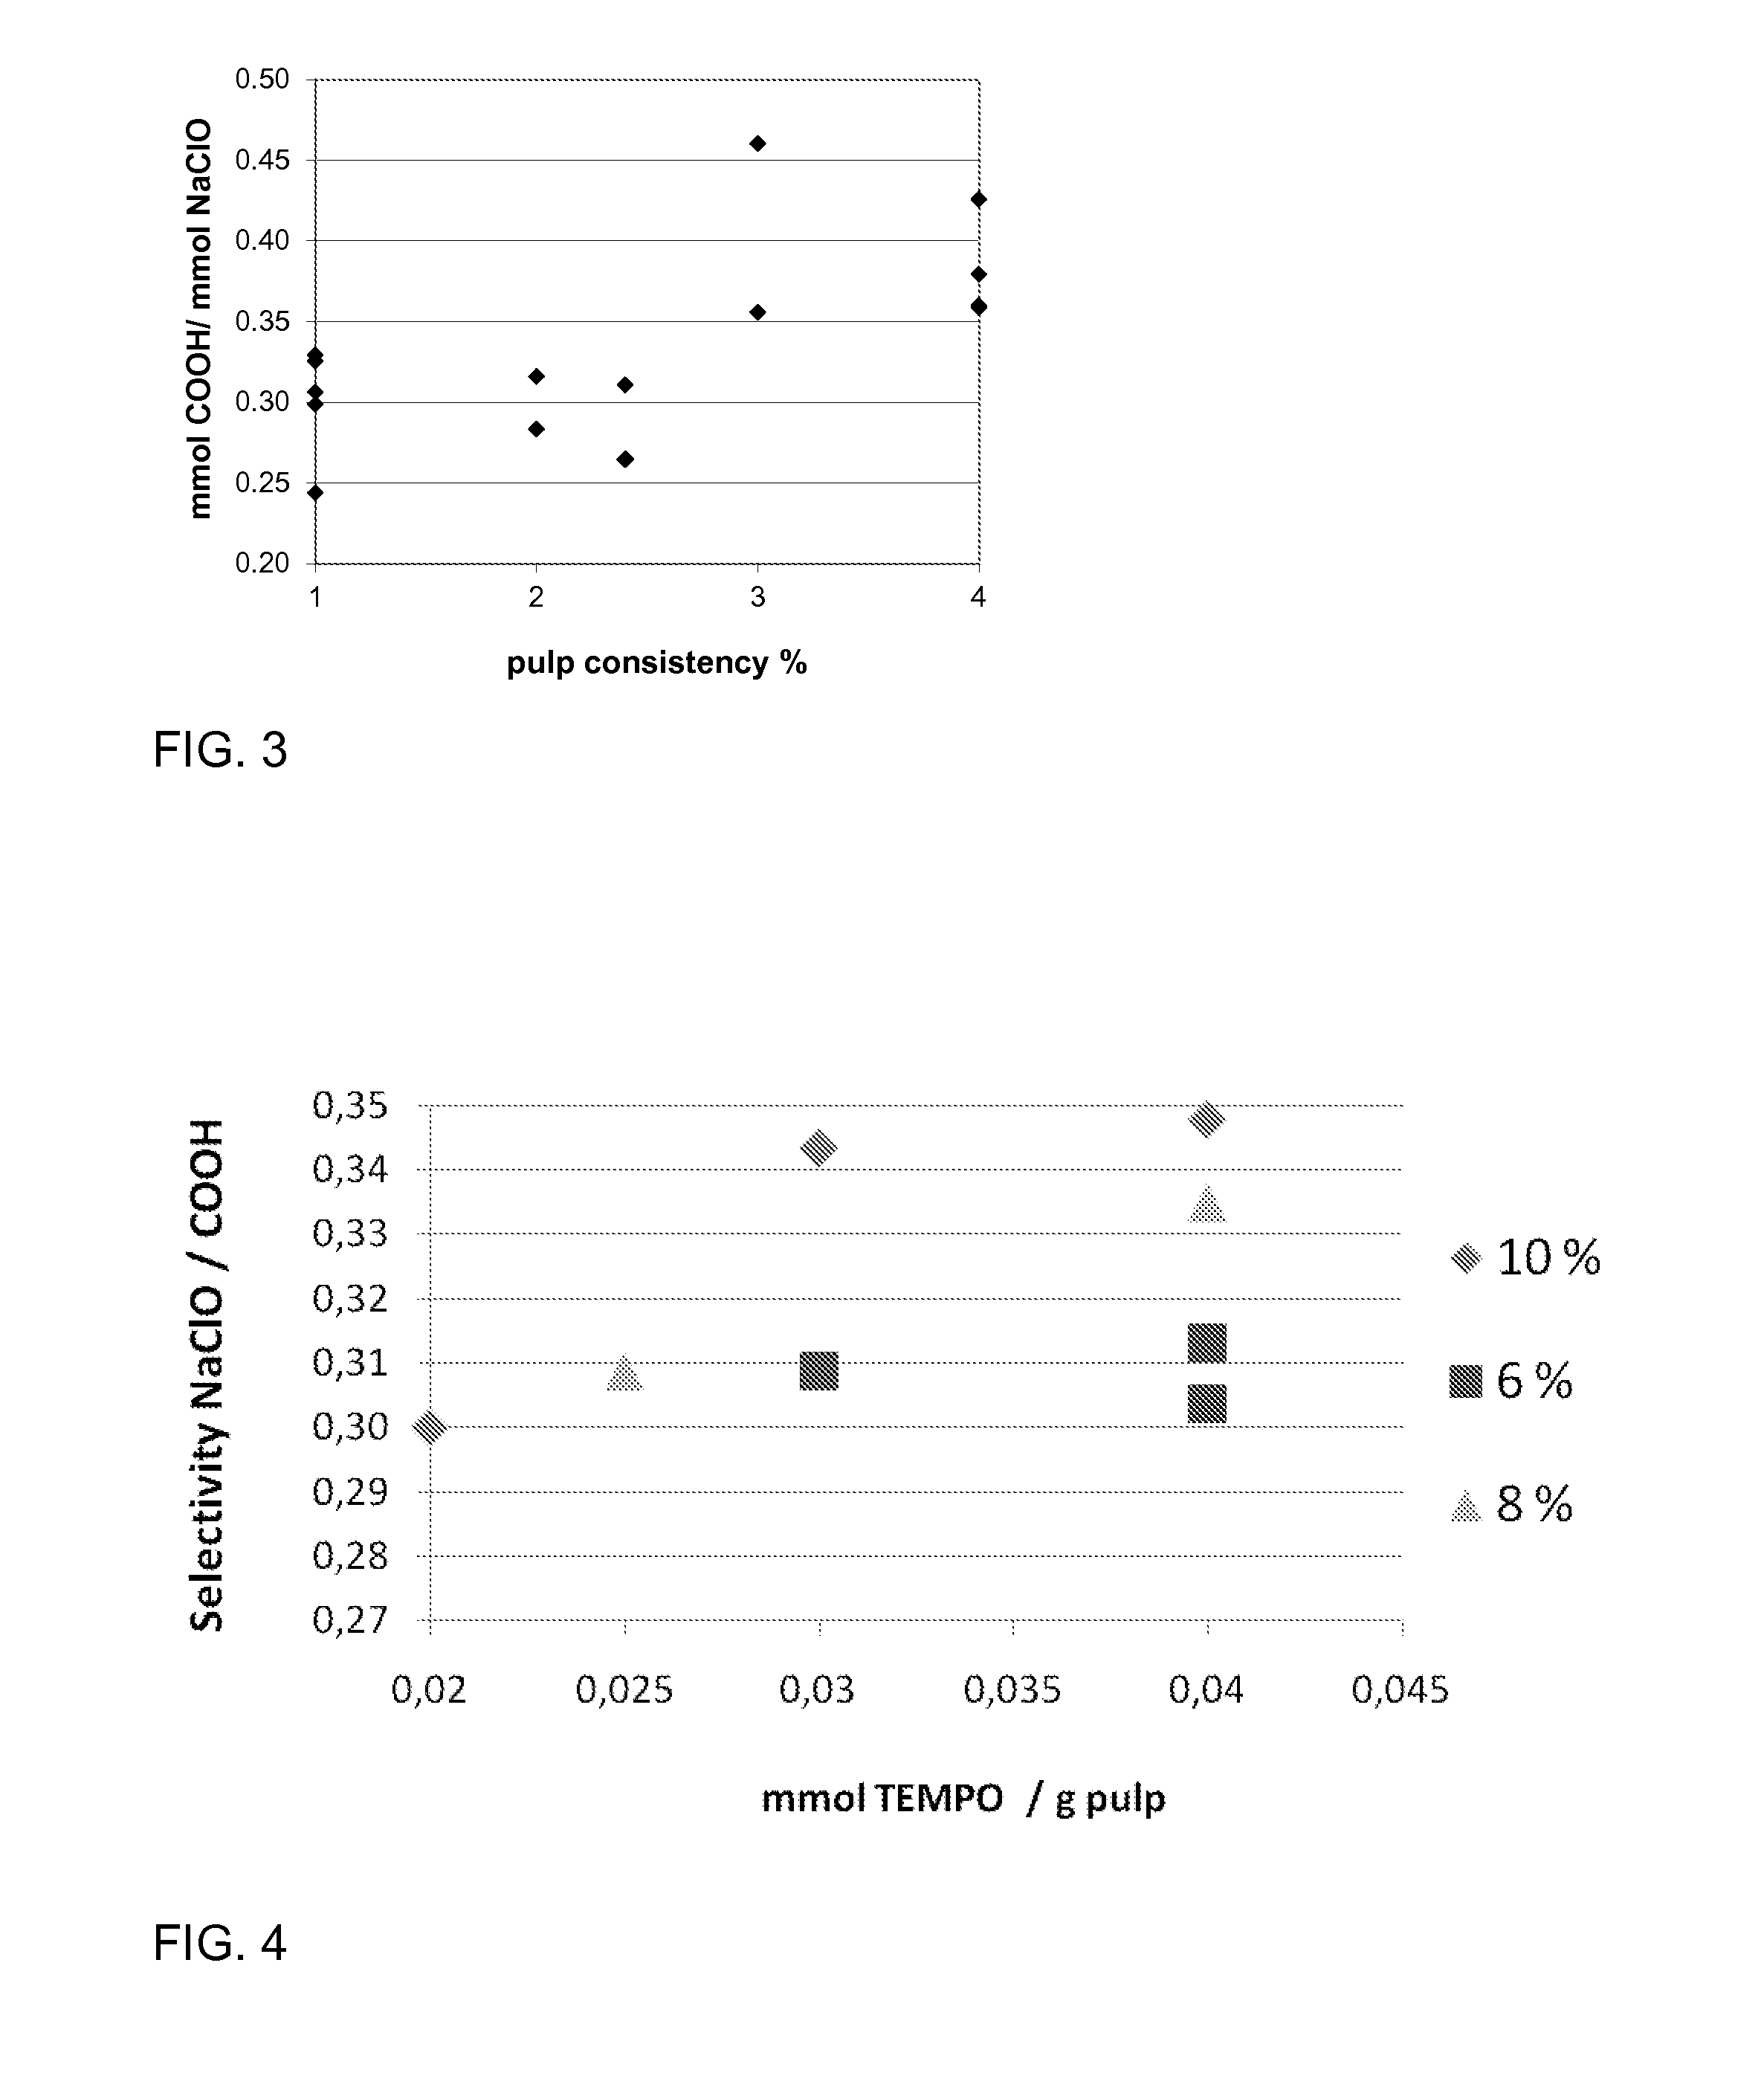 Method for catalytic oxidation of cellulose and method for making a cellulose product